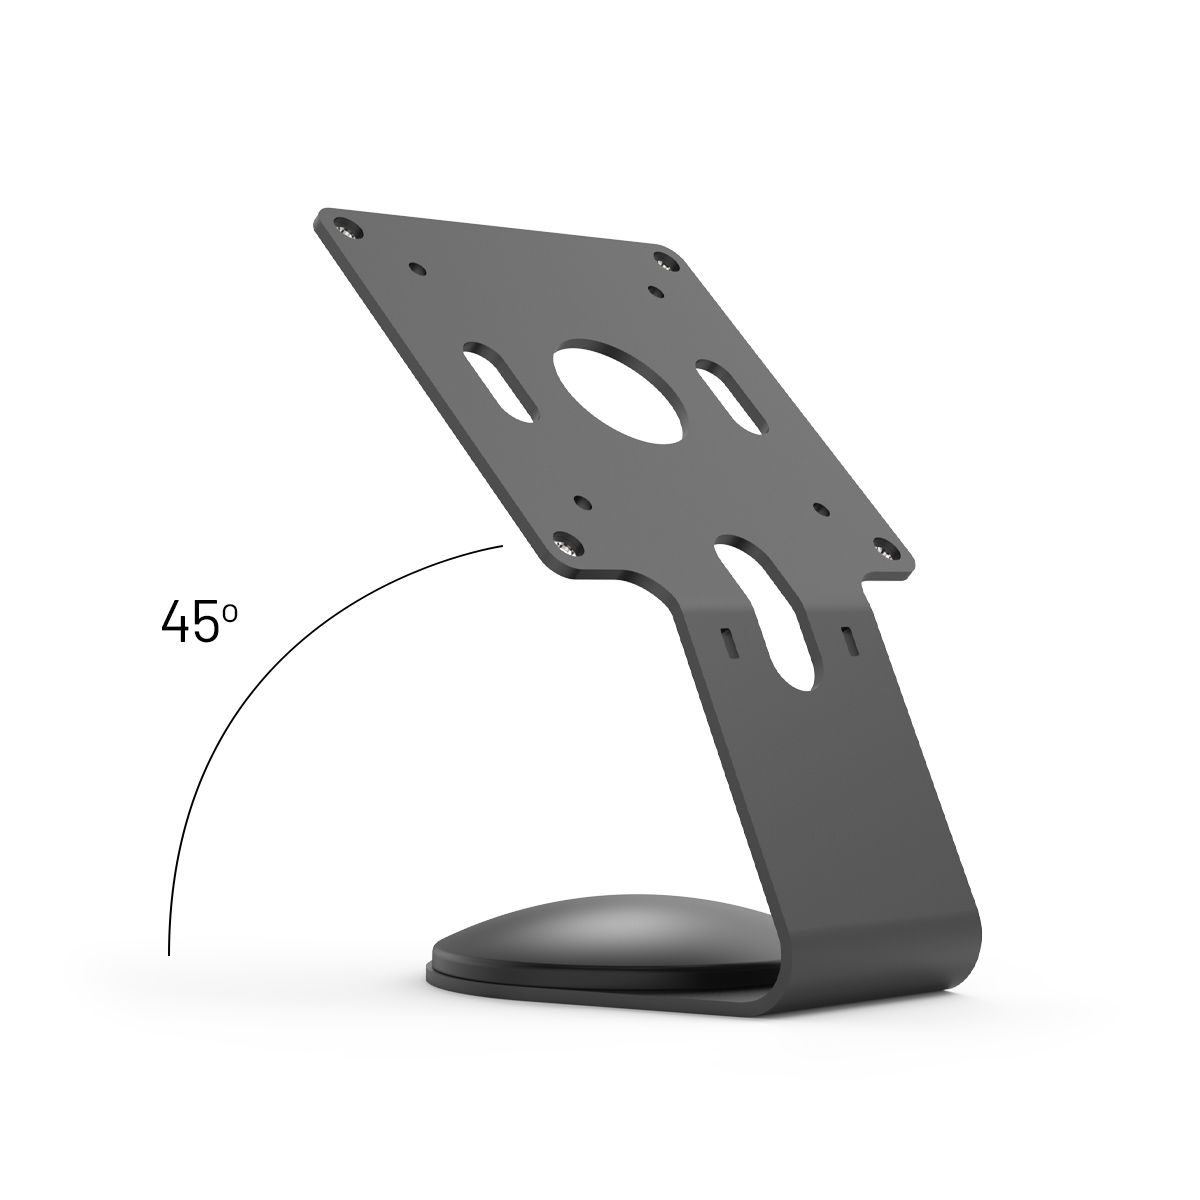 45-degree Powder Coated Steel Stand